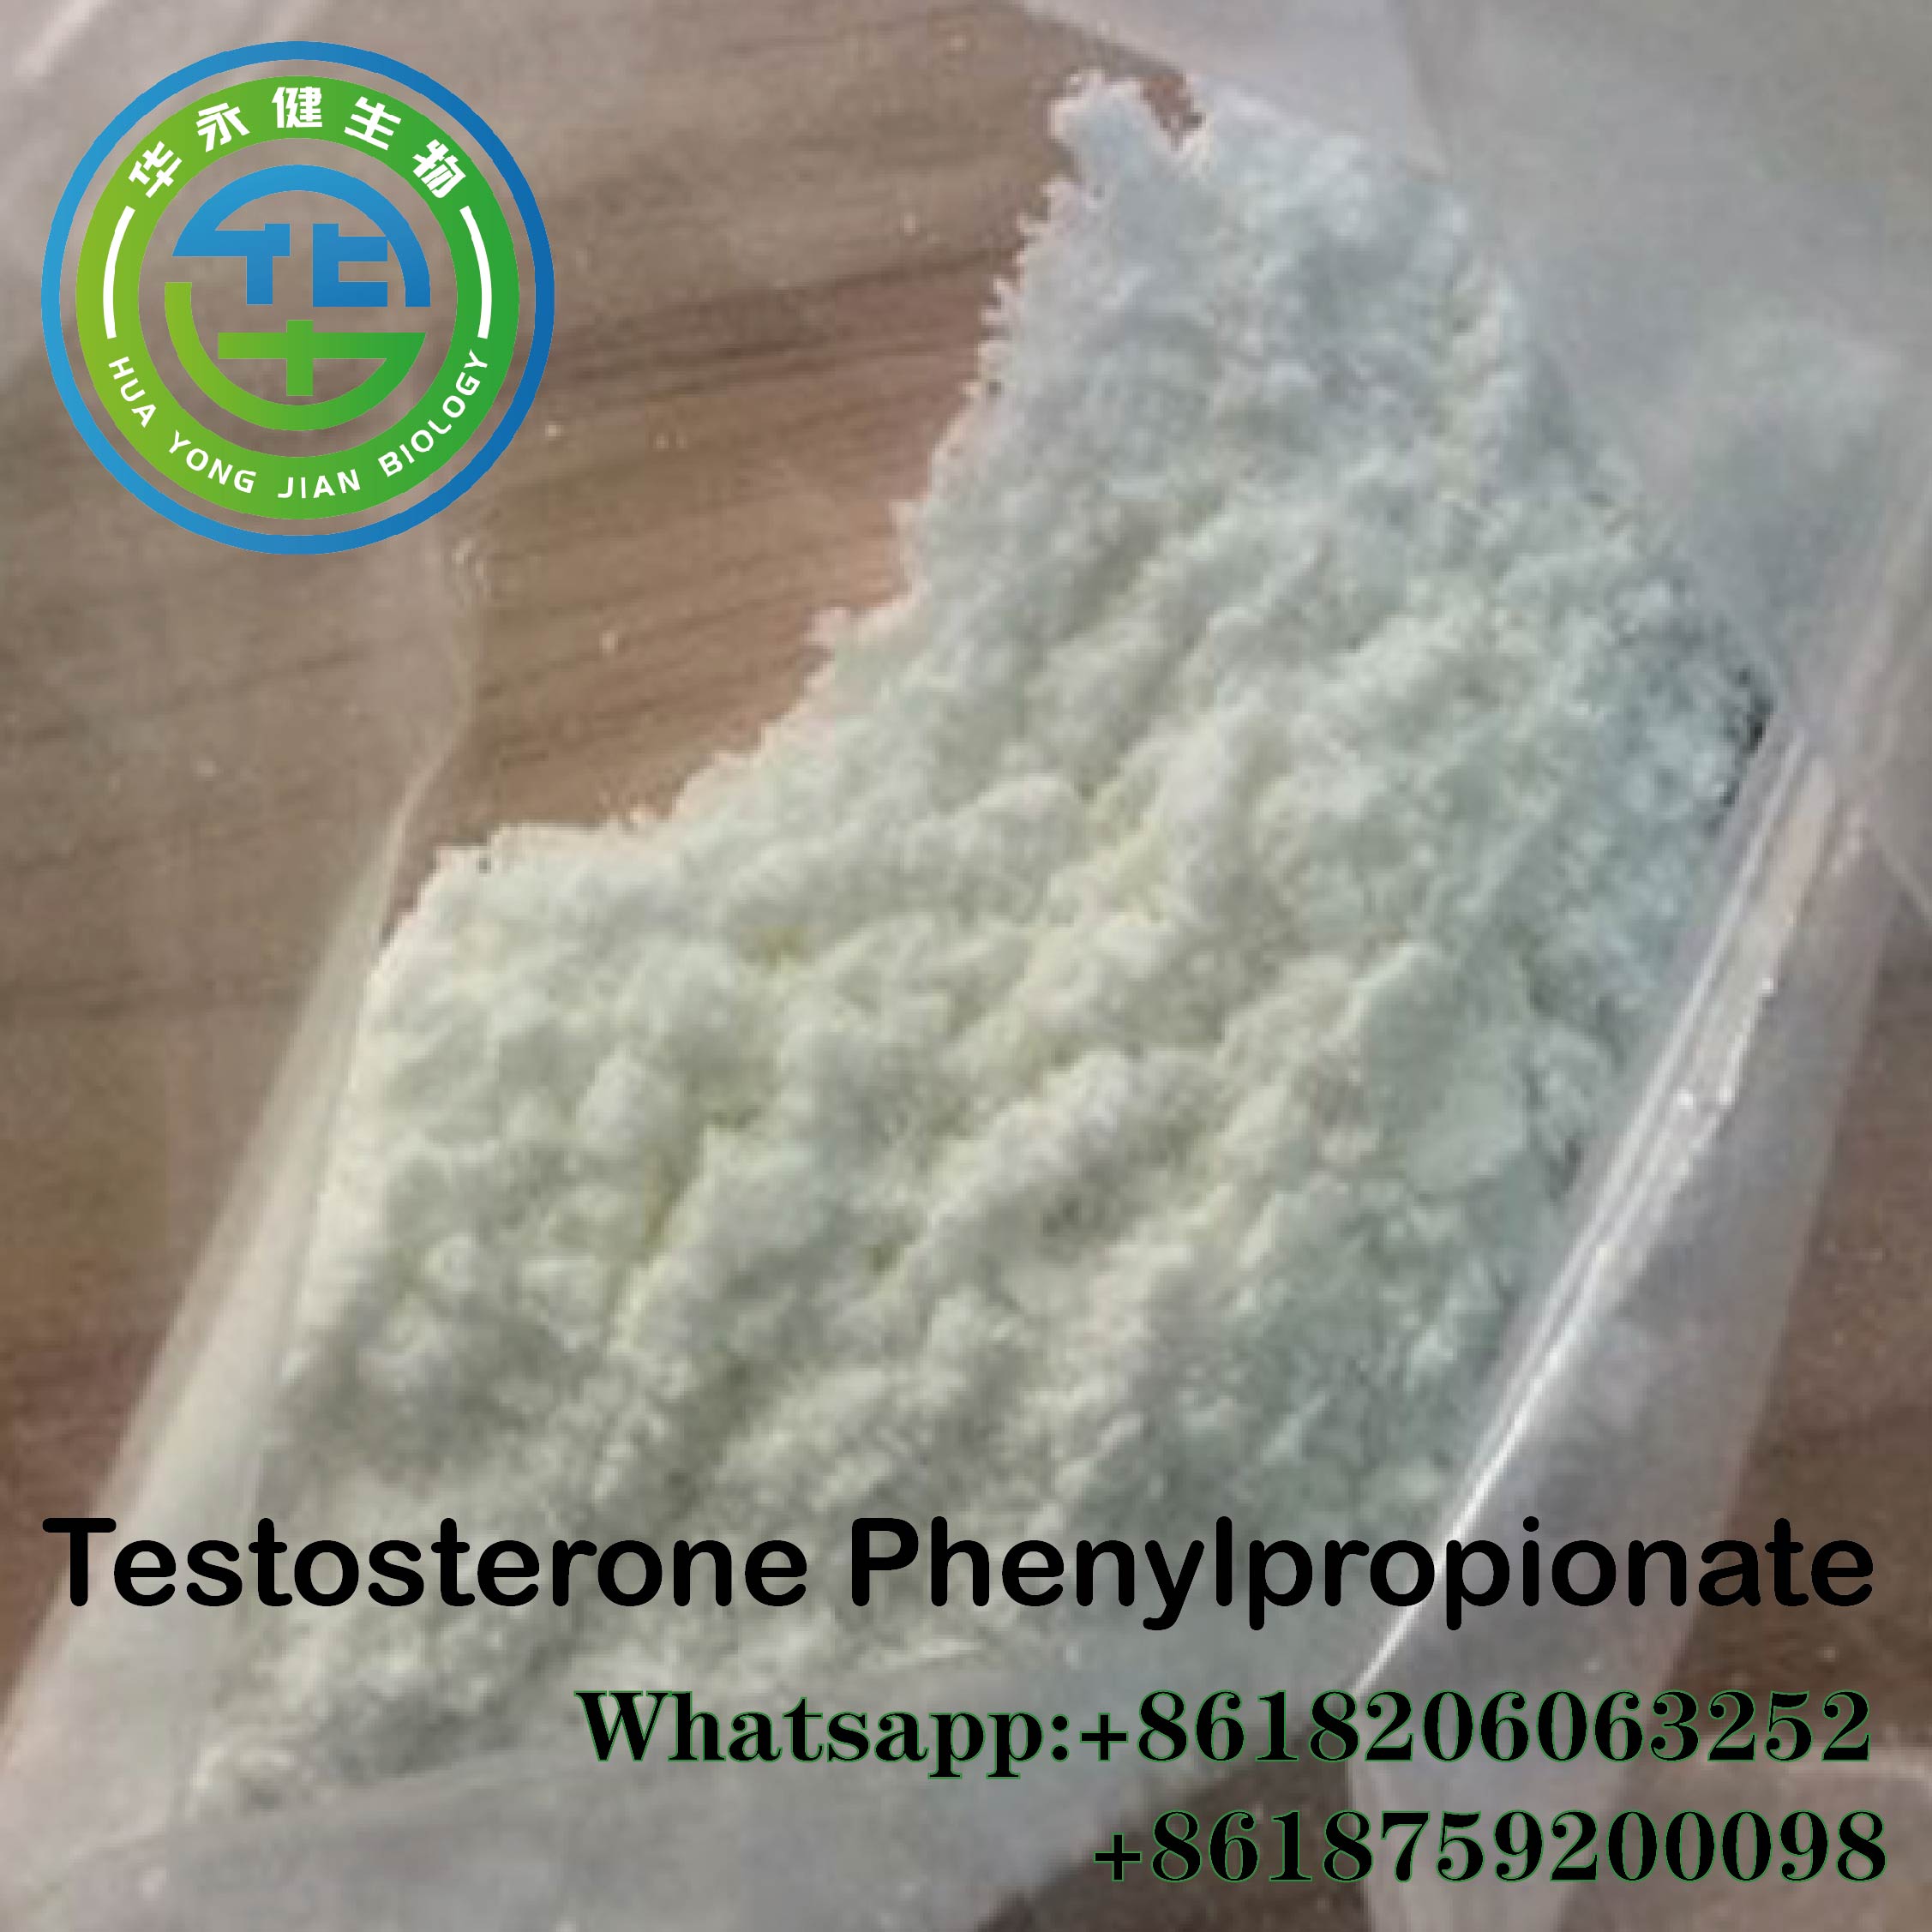 Top Sources for High Quality Steroid Powder